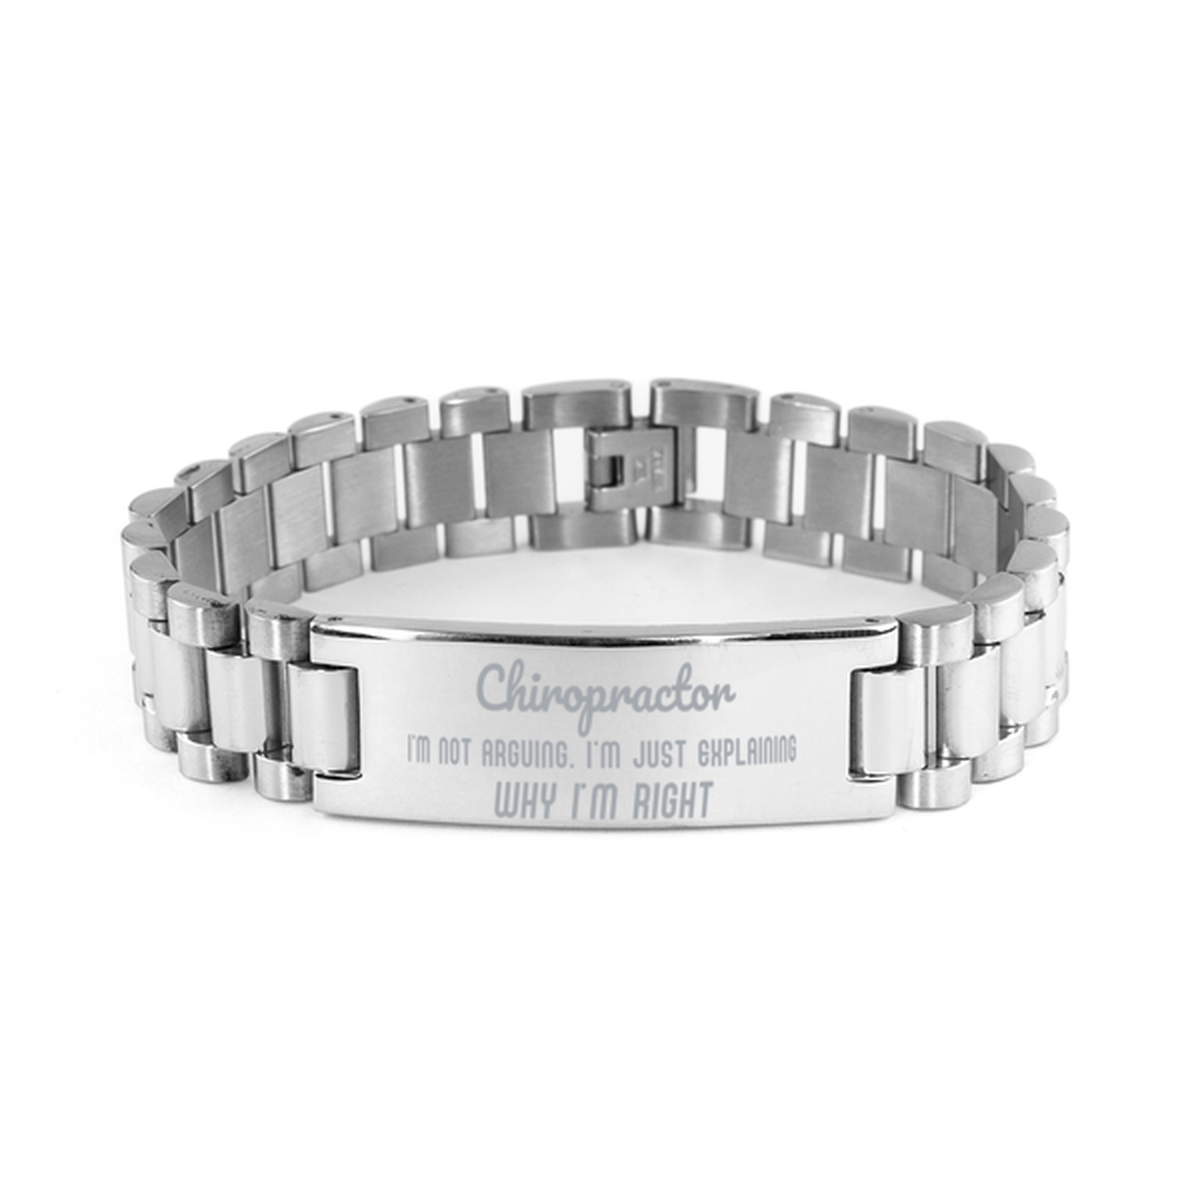 Chiropractor I'm not Arguing. I'm Just Explaining Why I'm RIGHT Ladder Stainless Steel Bracelet, Graduation Birthday Christmas Chiropractor Gifts For Chiropractor Funny Saying Quote Present for Men Women Coworker